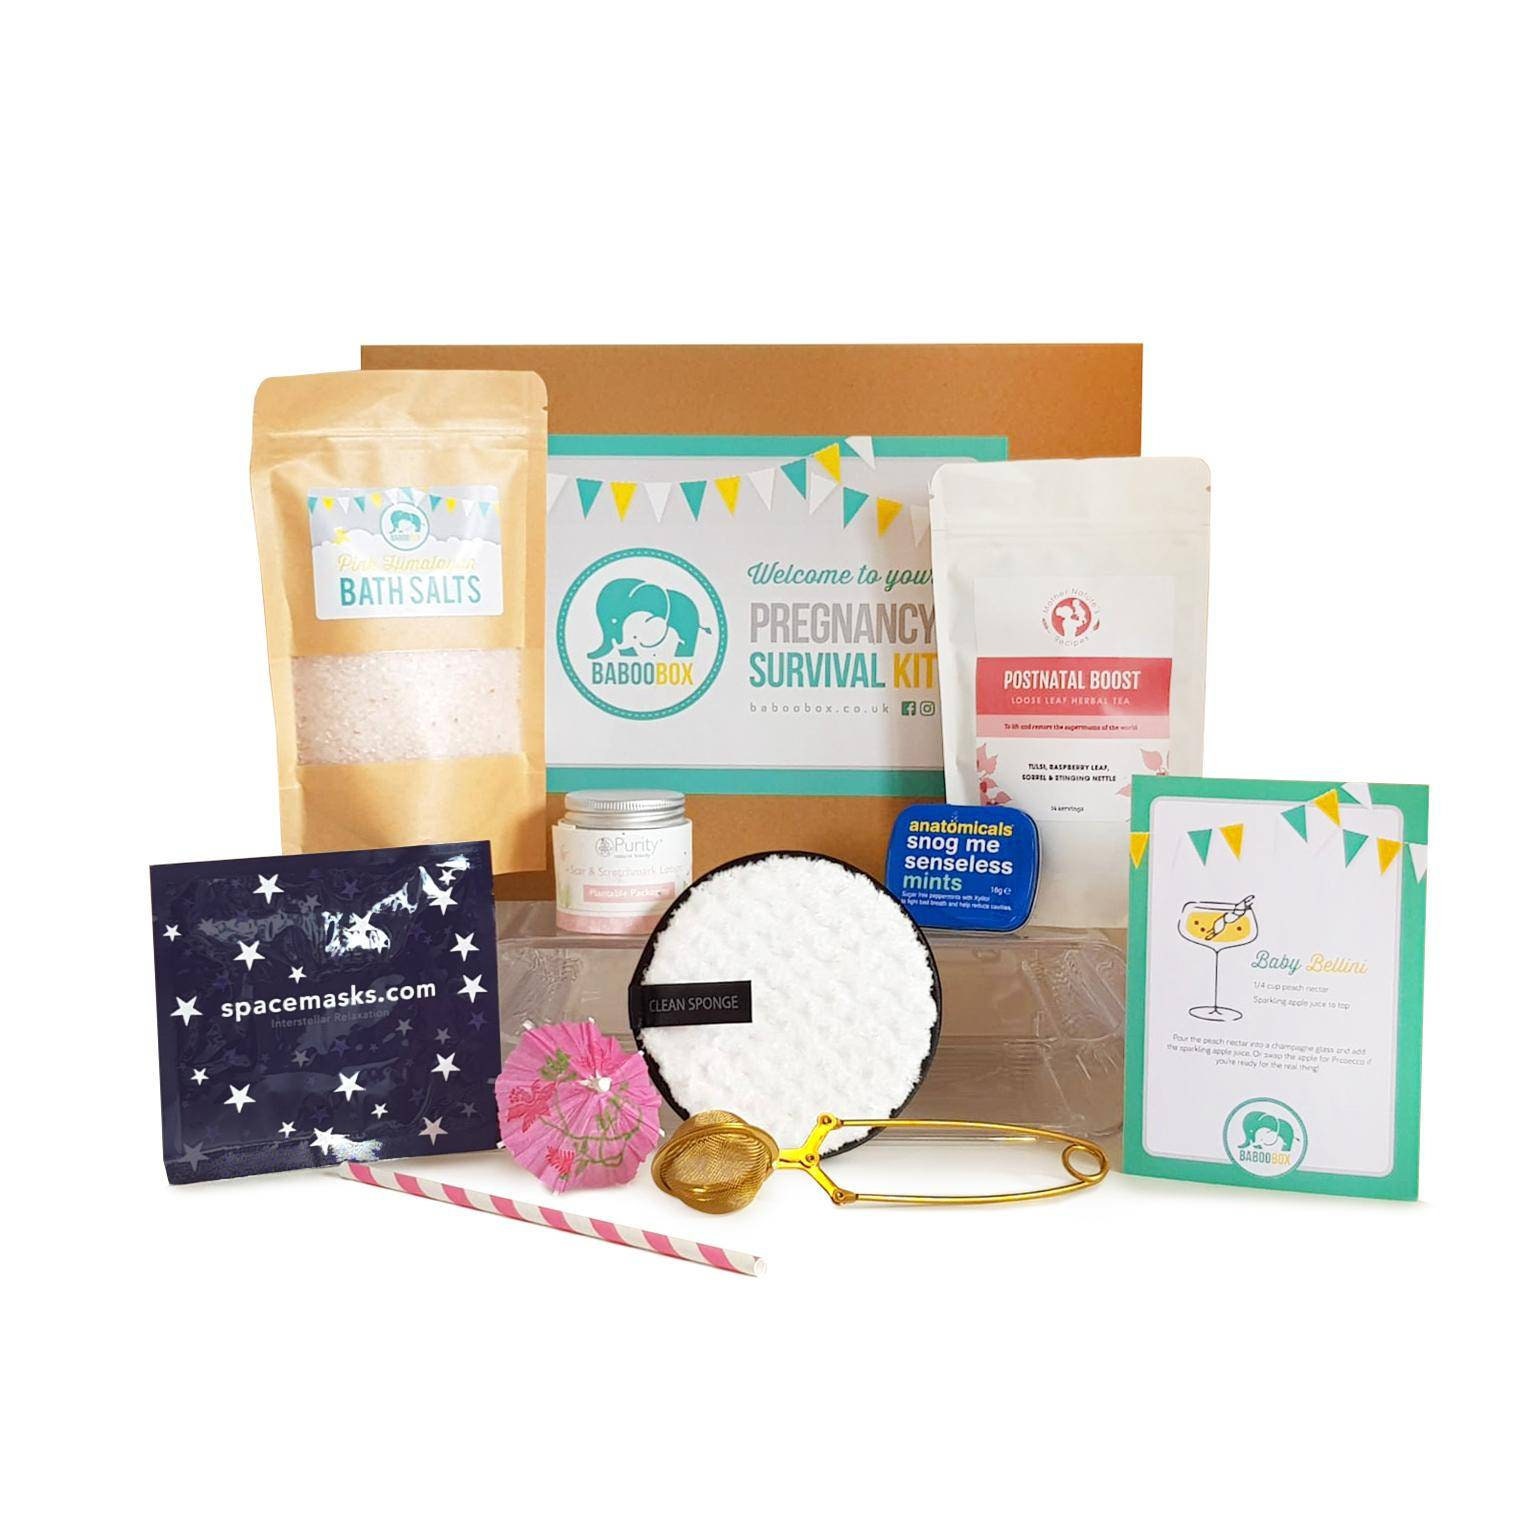 Best Postpartum C-Section Recovery Kit in Singapore - RESTORE Kit